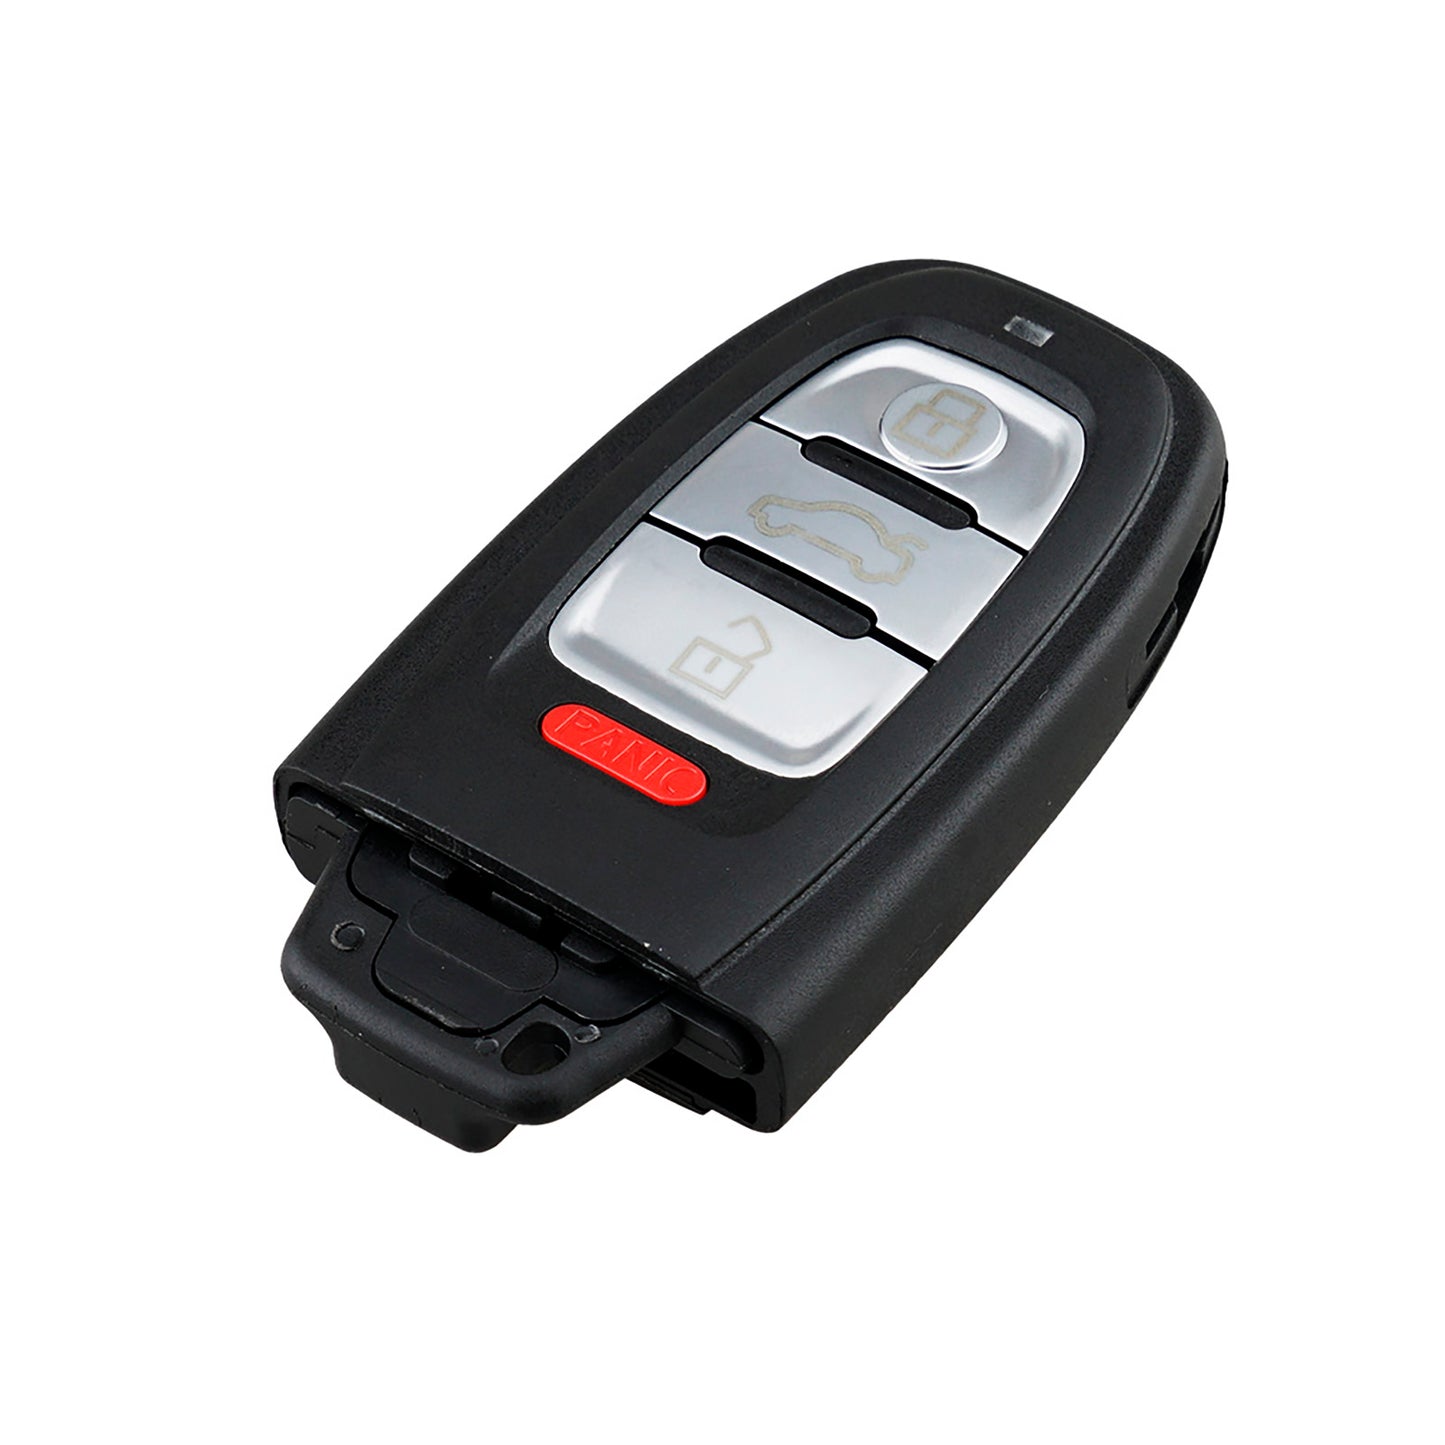 4 Buttons 315MHz Keyless Entry Fob Smart Car Remote For 2008-2012 Audi A4 A5 Cabriolet S4 Avant S5 Coupe Q5 2.0L FCC ID: IYZFBSB802 SKU : J209